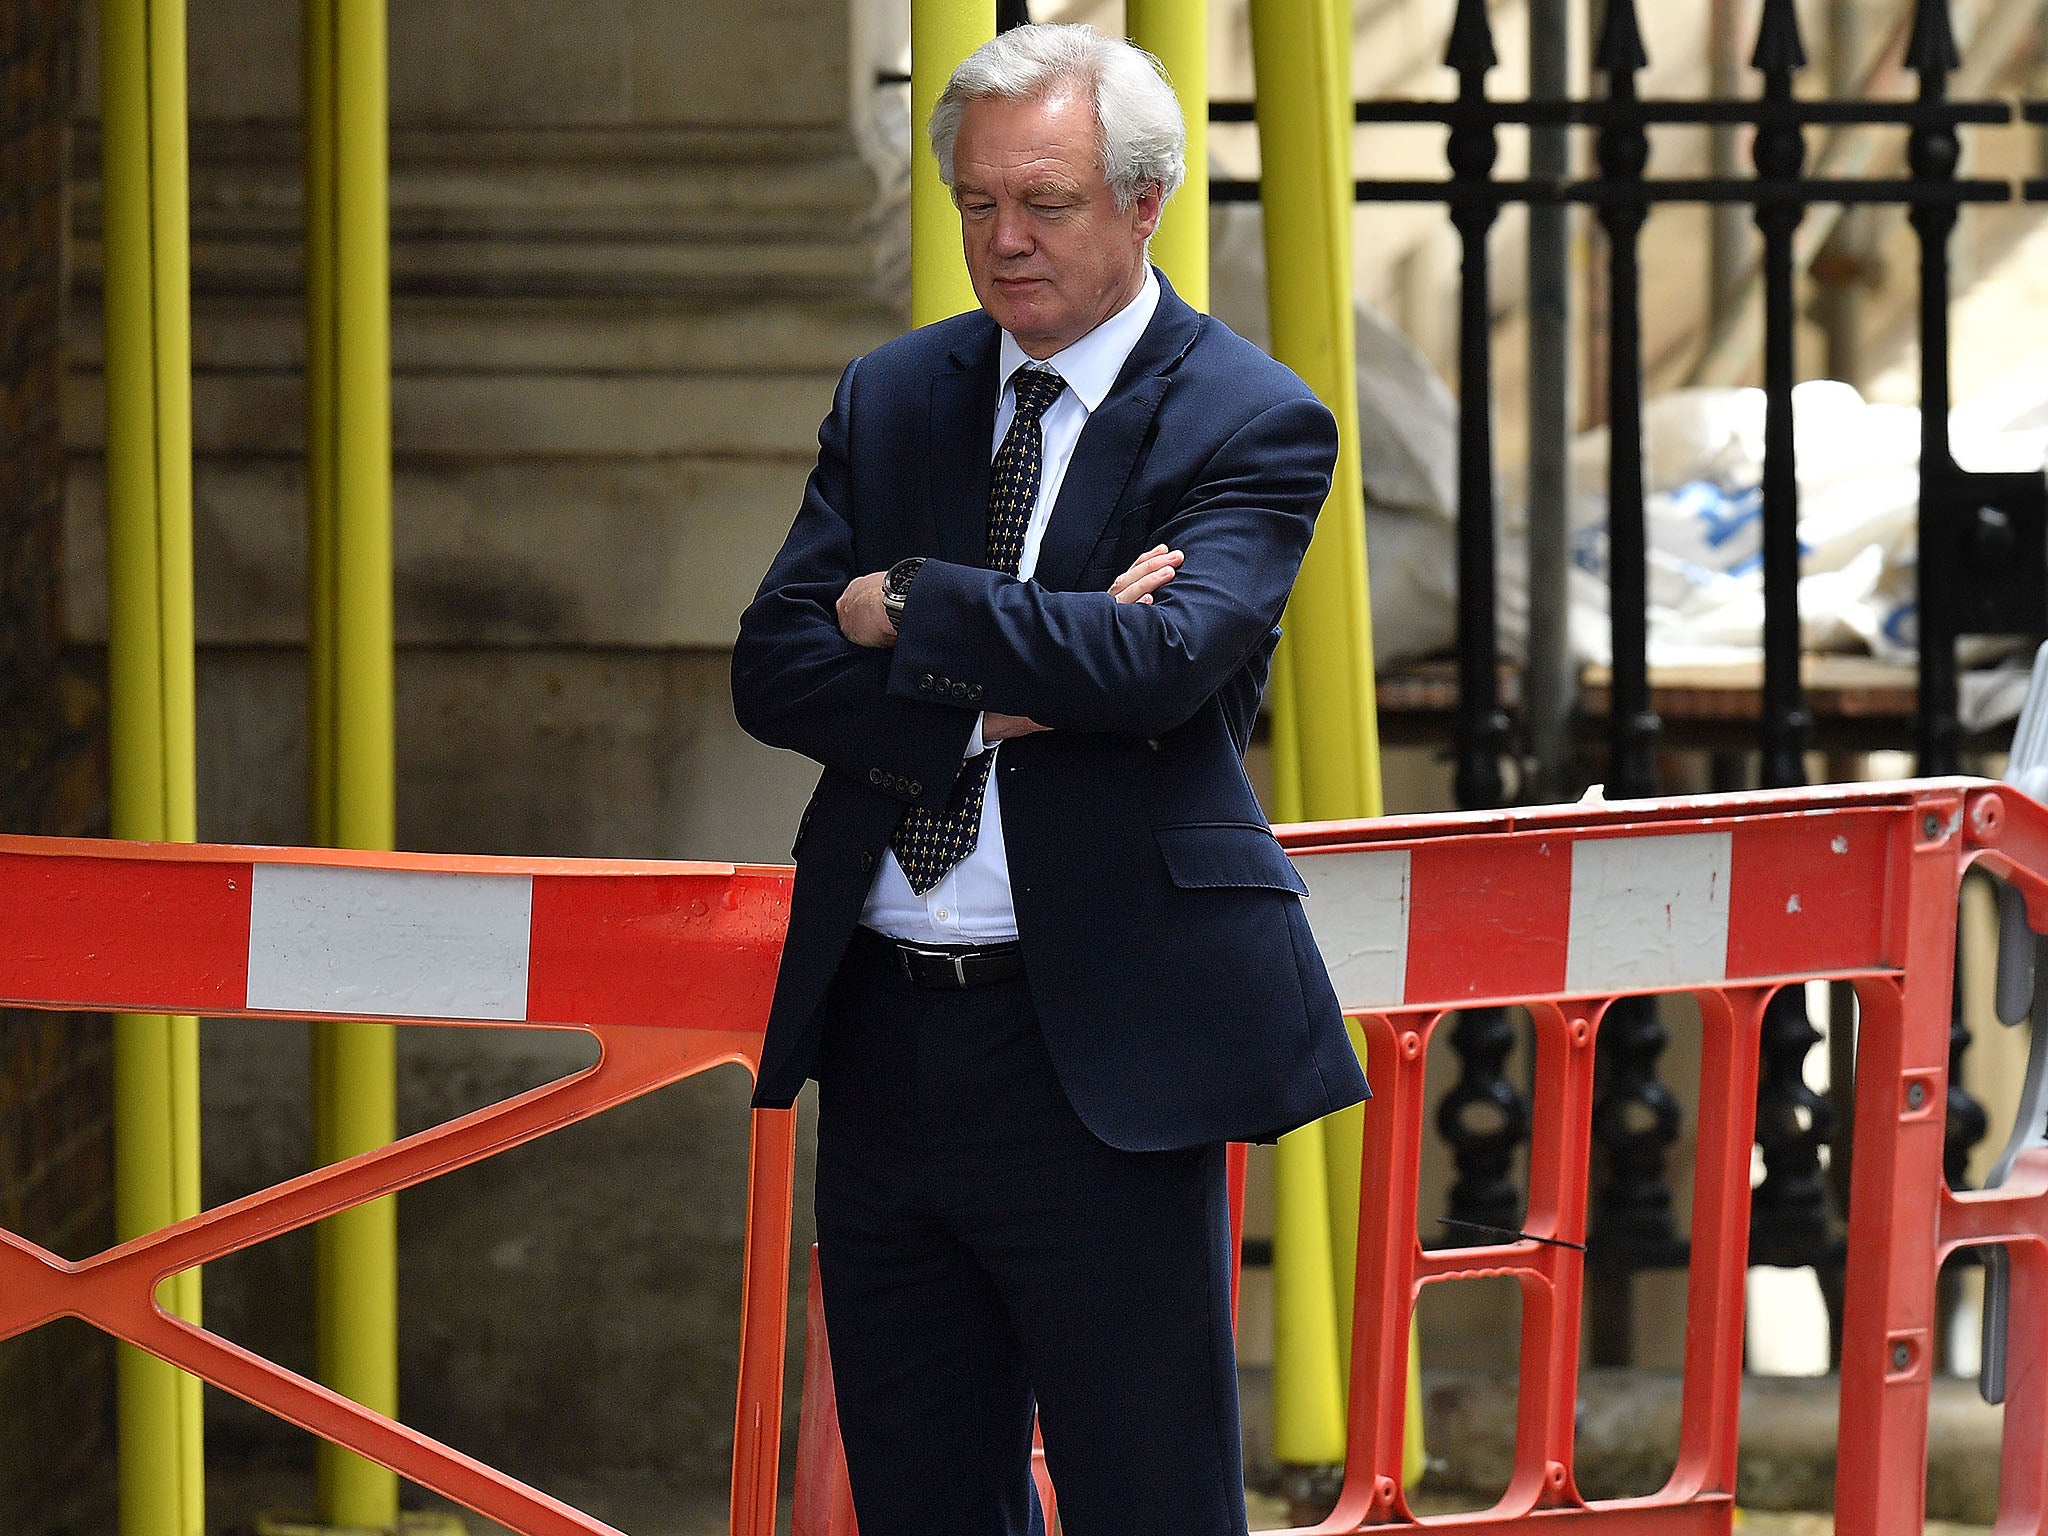 Has David Davis hit the reverse lights and backed himself into a corner?